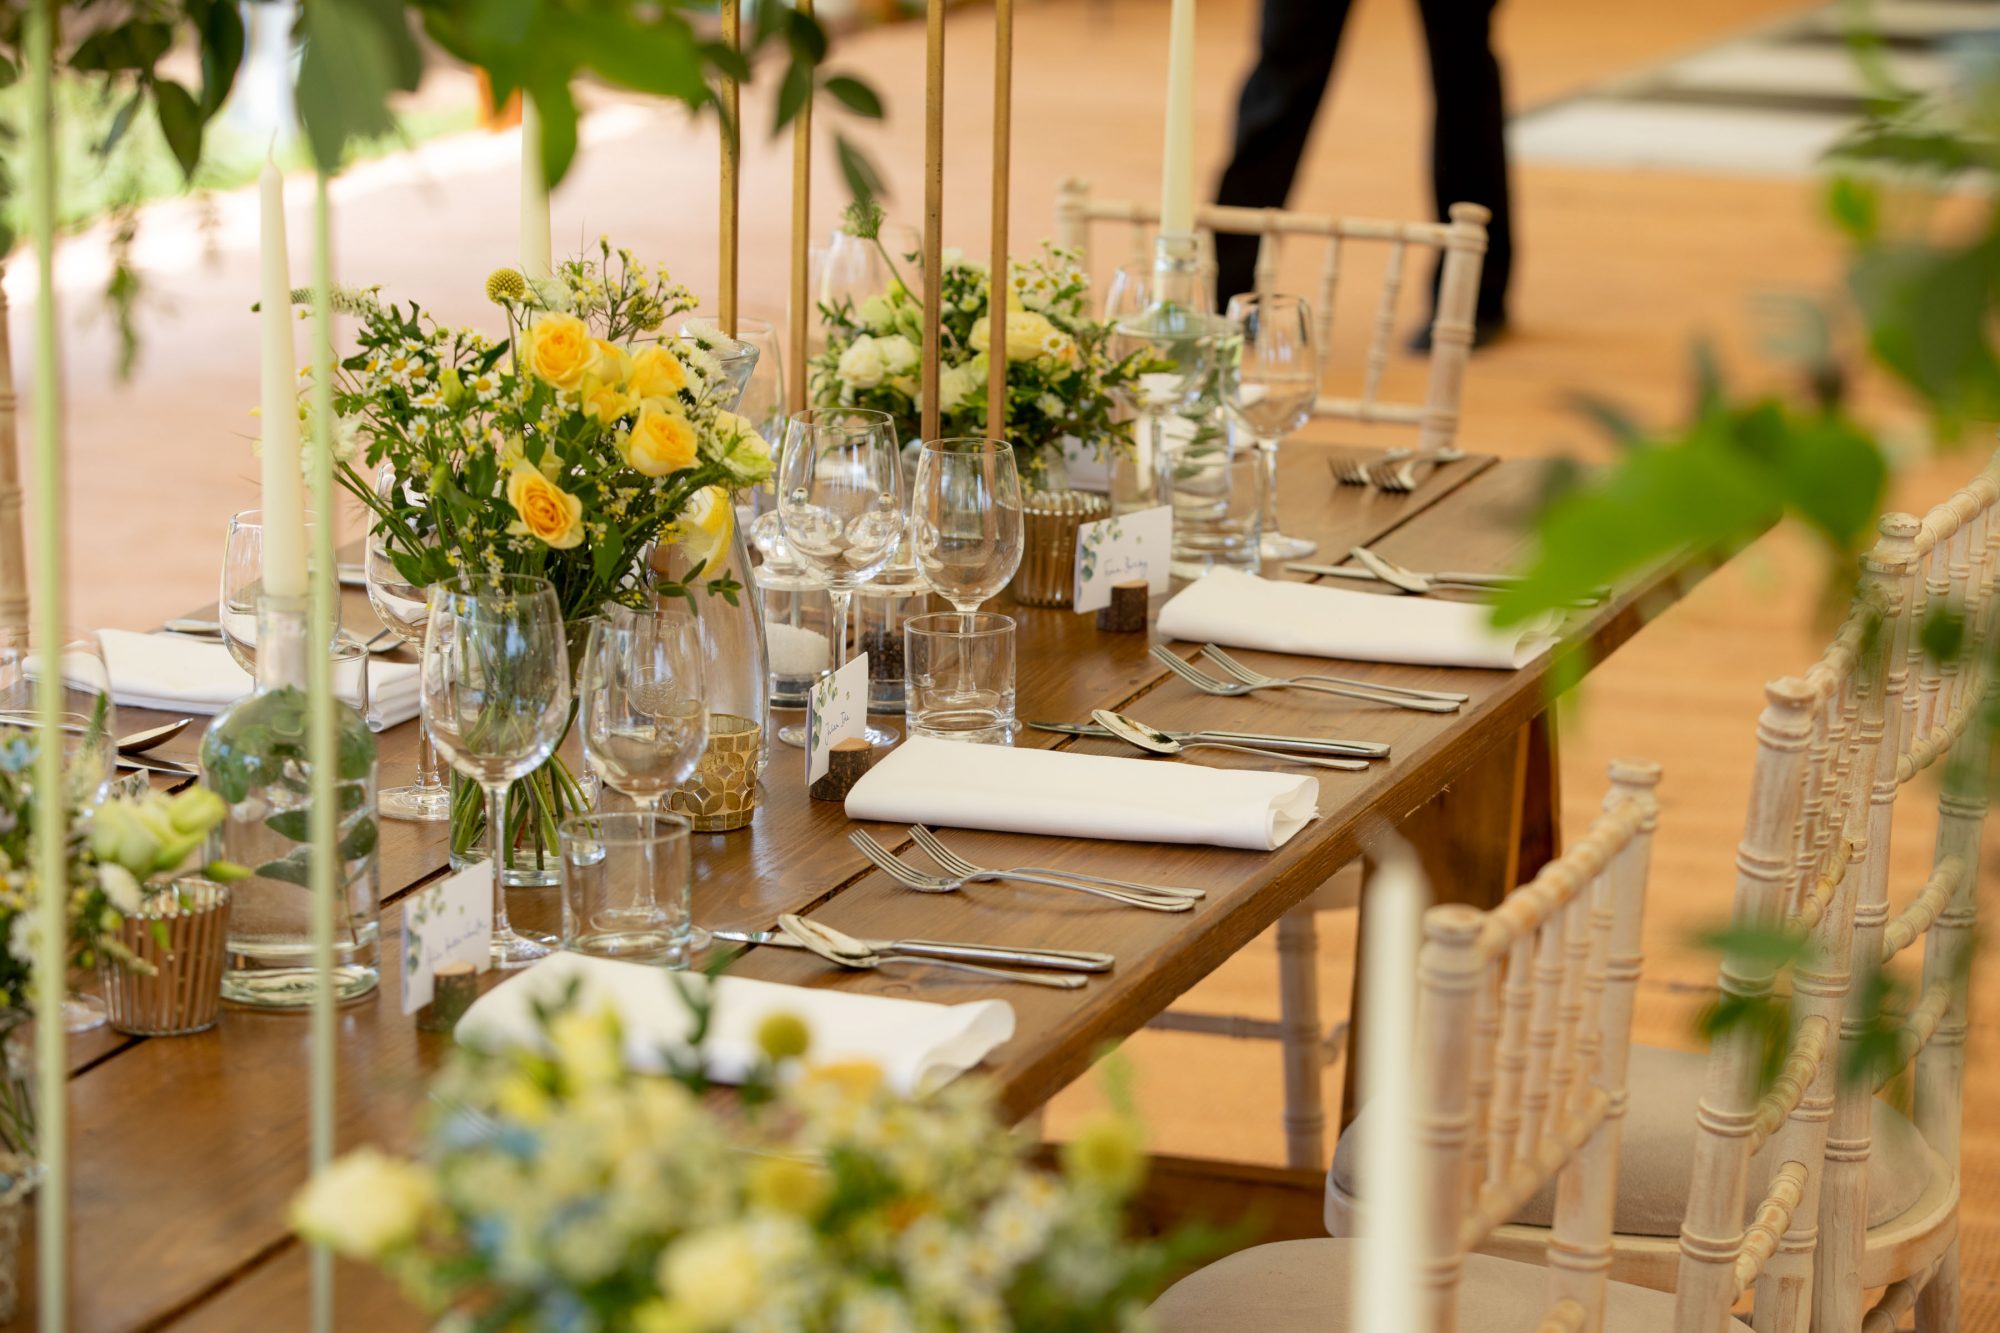 Wide rustic wooden trestle tables with botanical theme, white pillar candles and ivory crockery